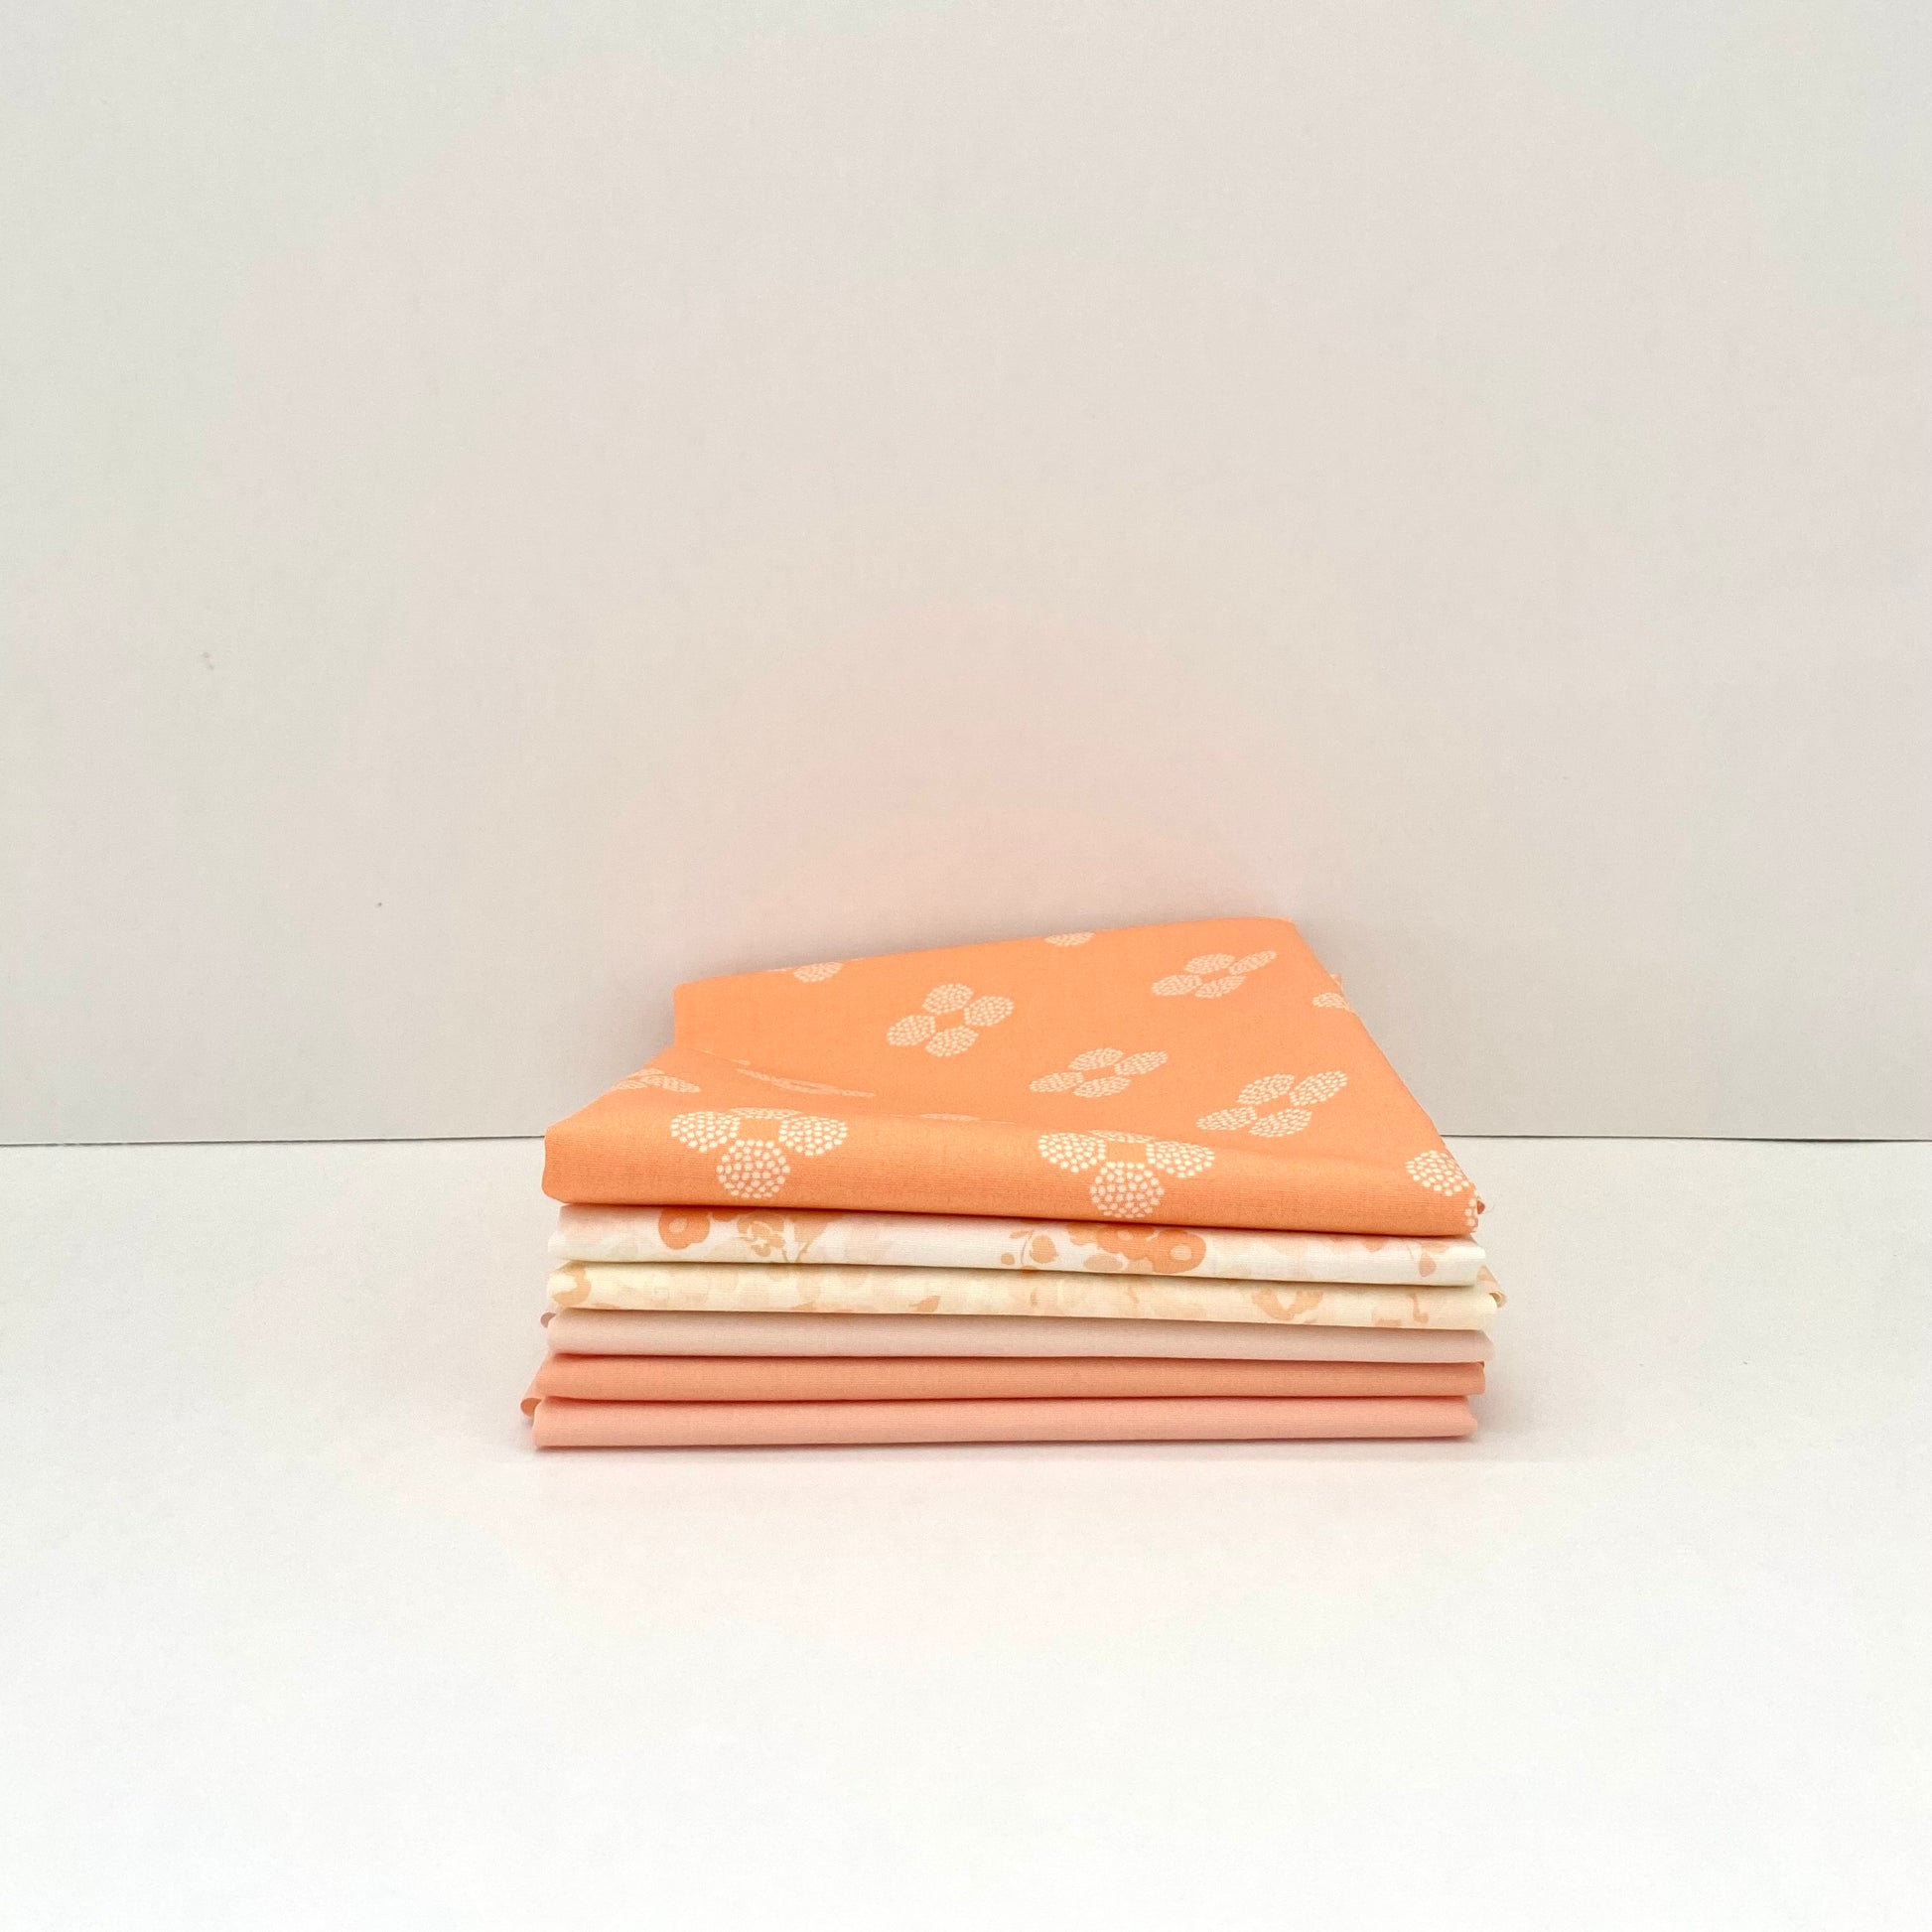 Fabric bundle sold by Dolly Lou Fabrics, contains Art Gallery Fabrics Nectarine Fusion and Pure Solids 